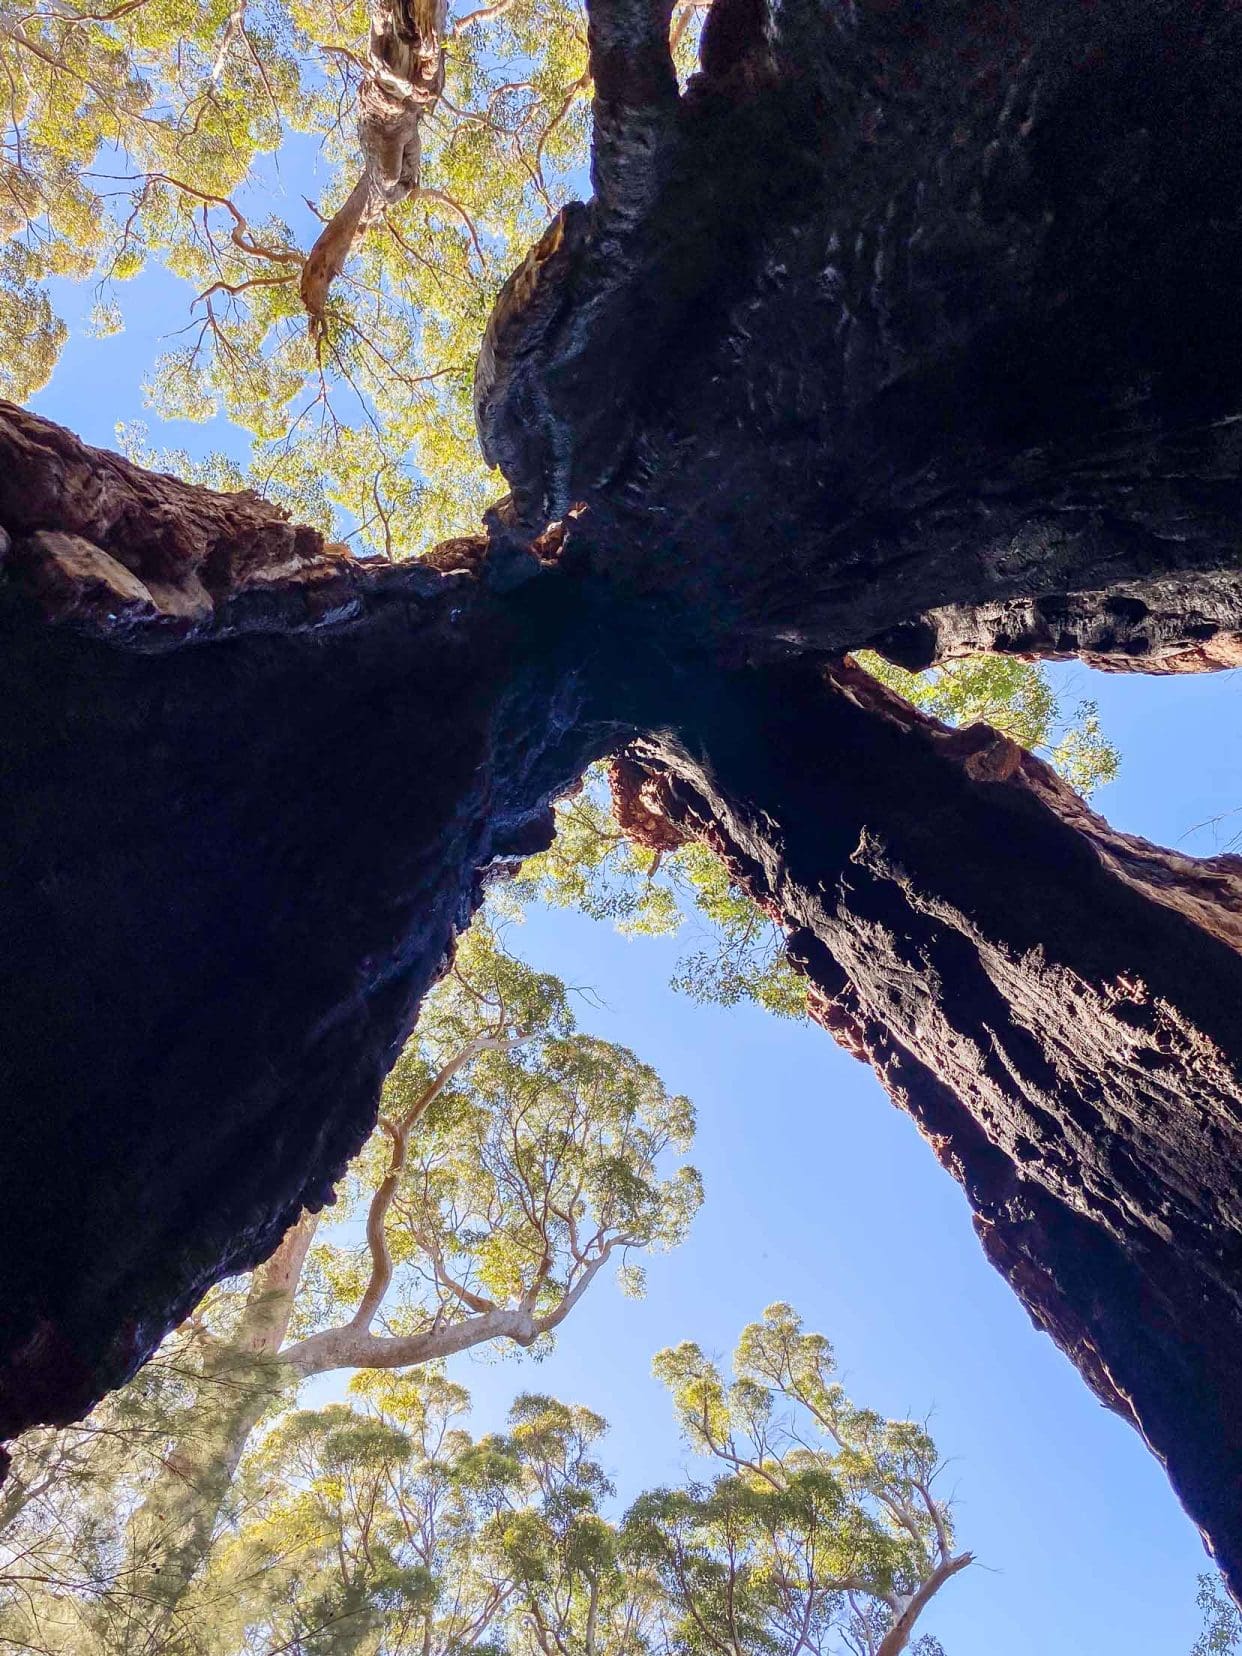 Giant-Tingle-looking-up-from-below-the-tree